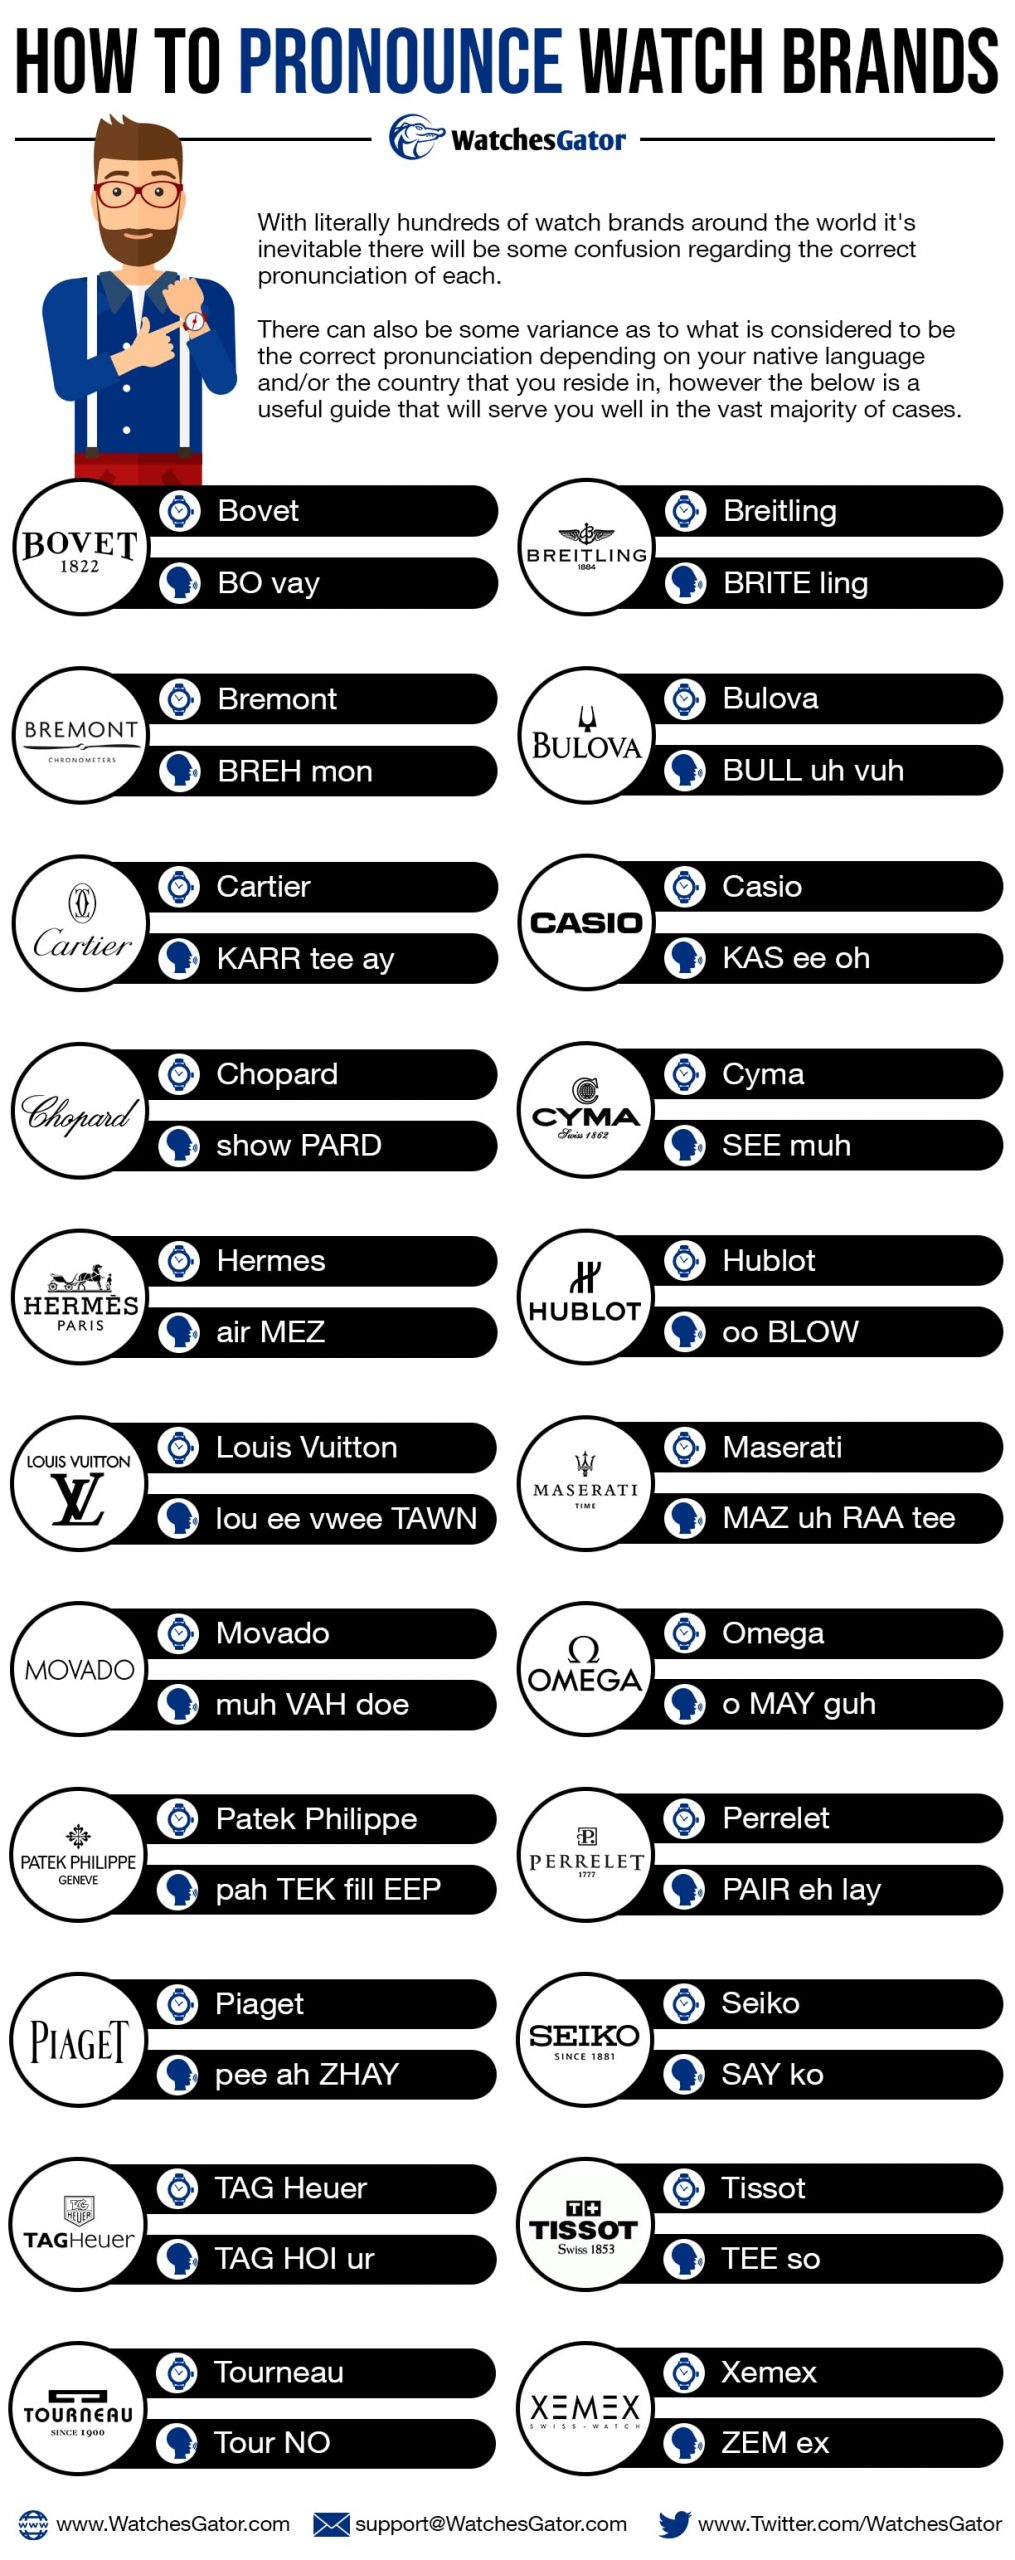 How To Pronounce Watch Brands